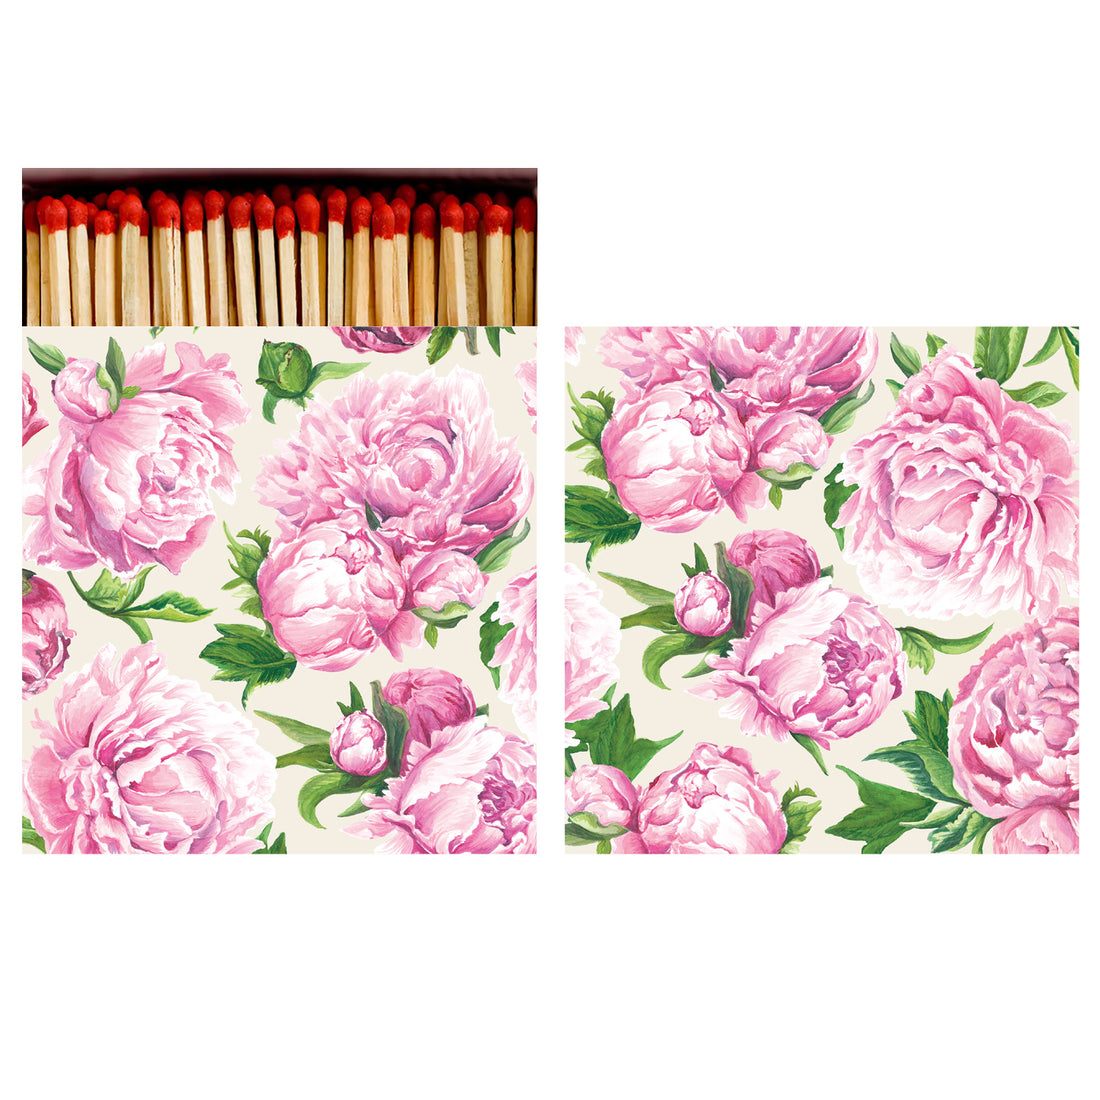 Two sides of a square match box, the left of which is open slightly to reveal the matches inside. The artwork on the box depicts large light pink peony blooms with deep green leaves scattered over a cream background.